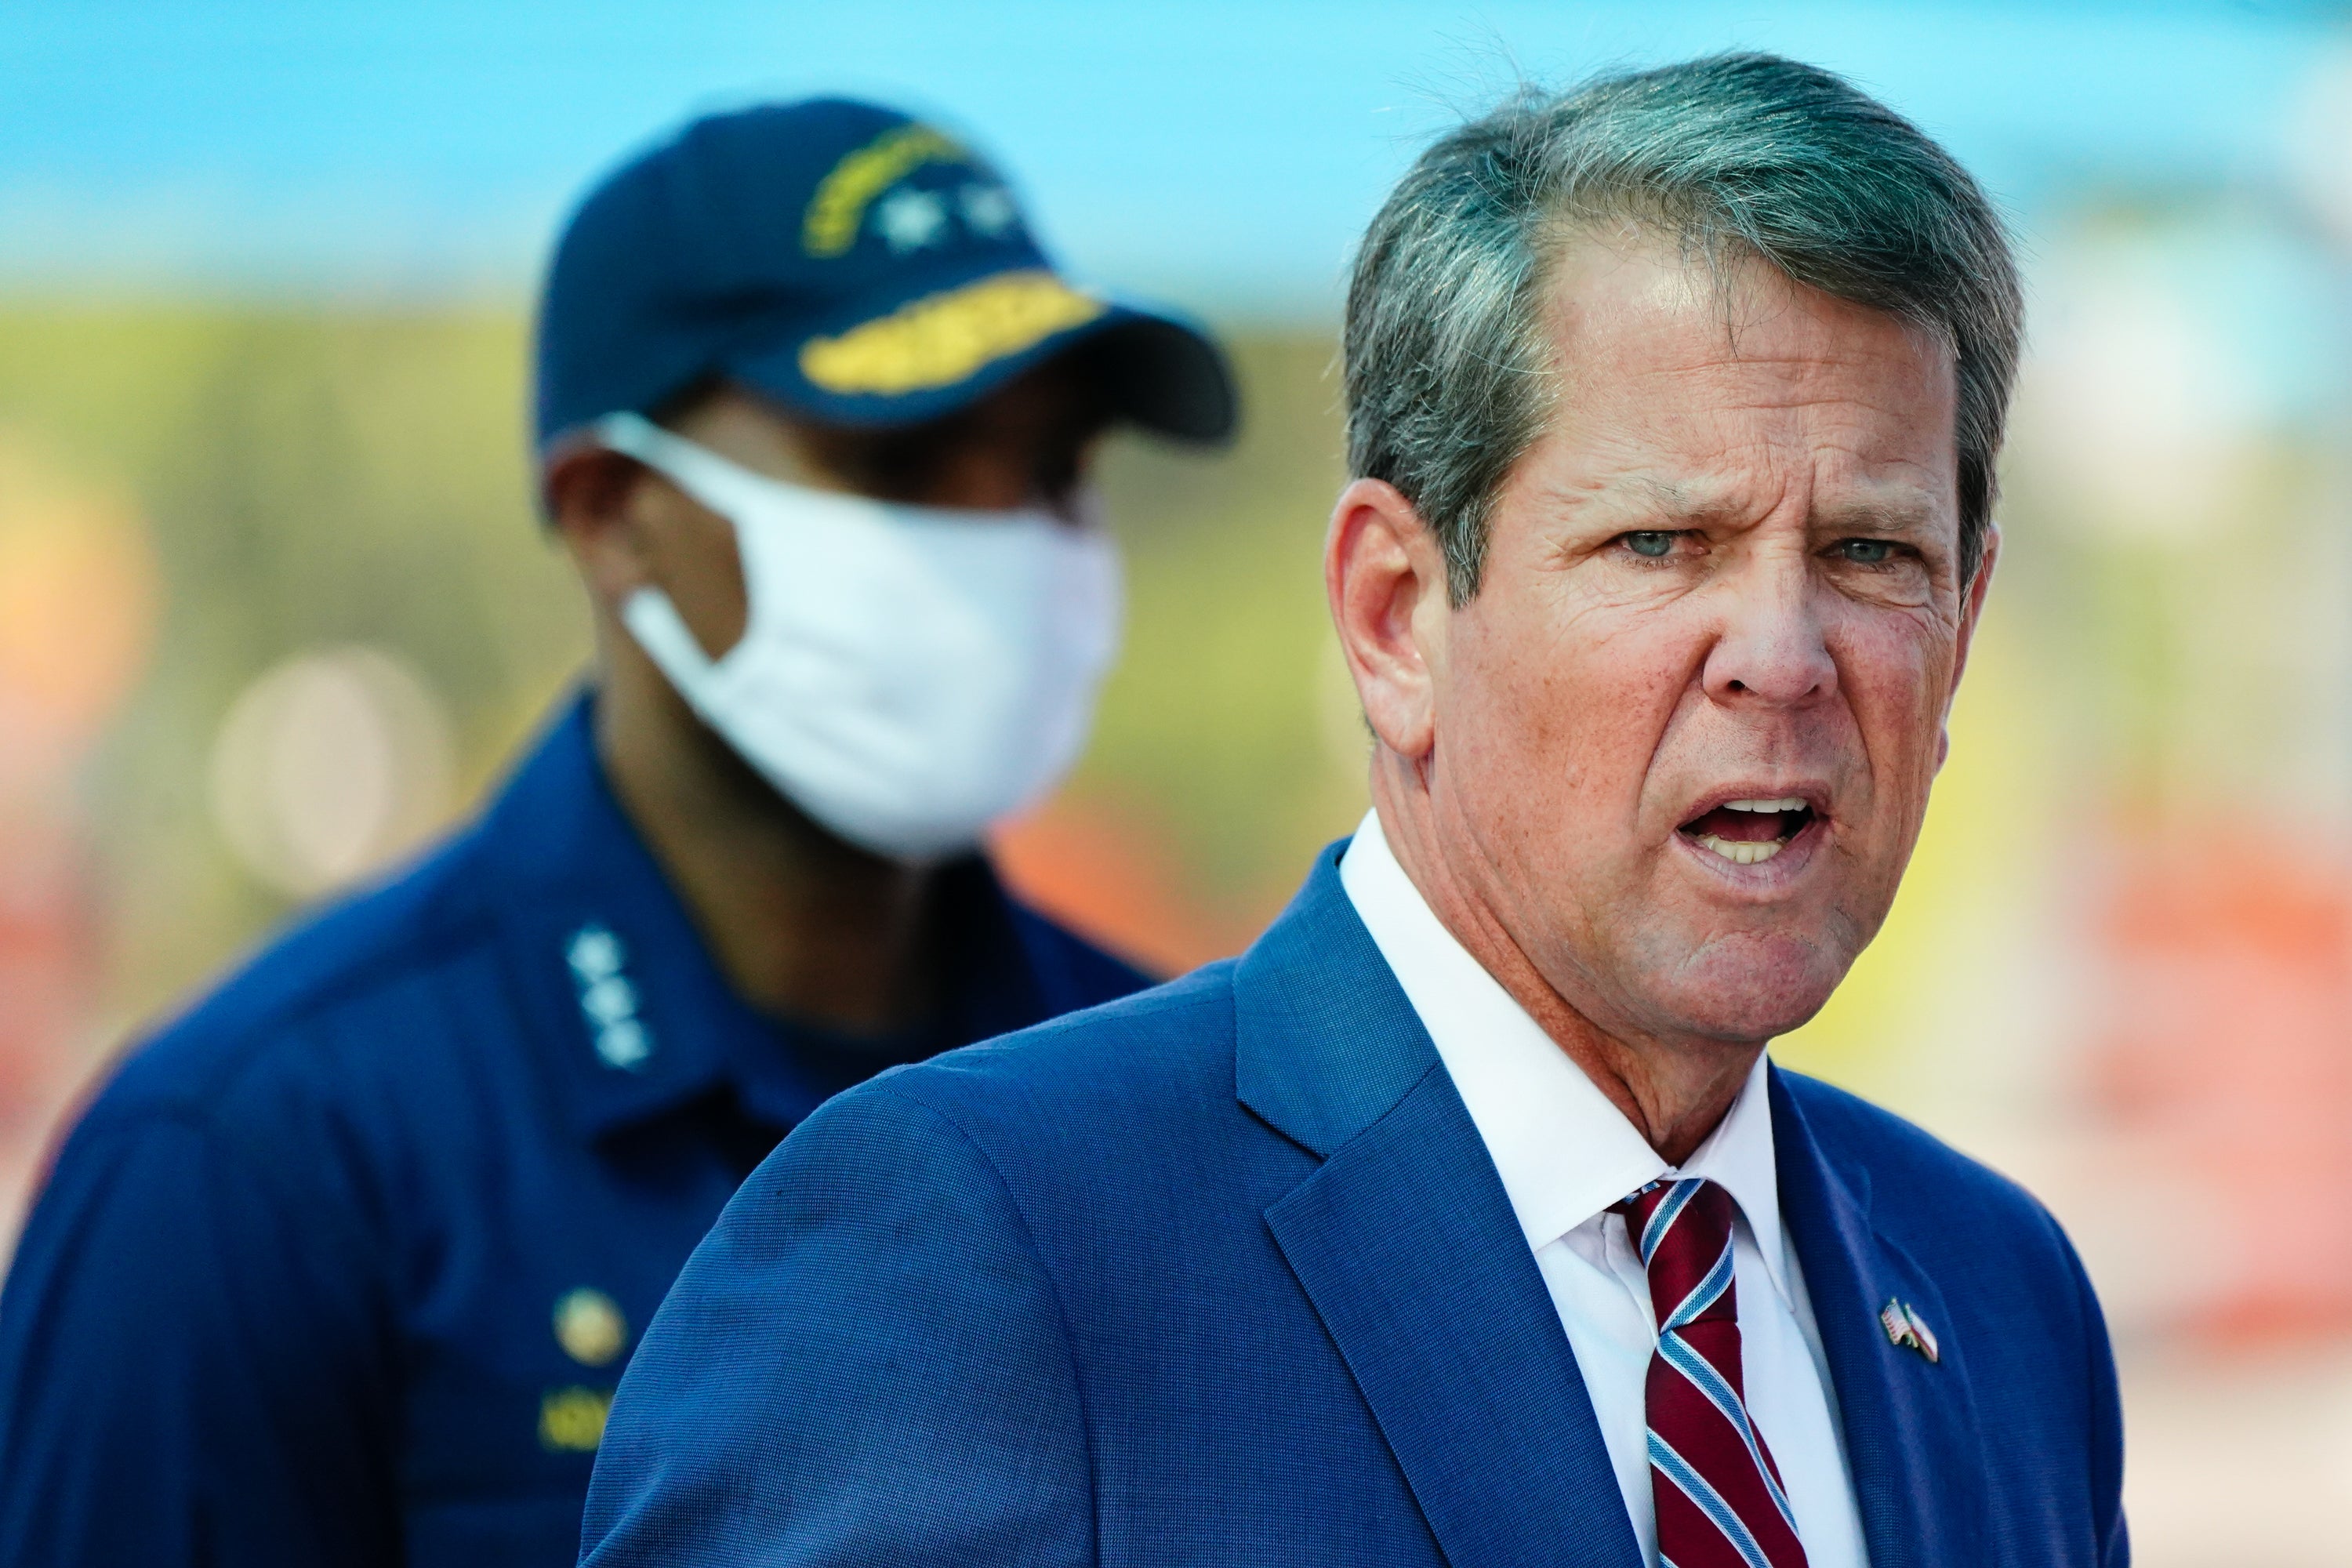 Brian Kemp, the governor of Georgia, was called by the president on Saturday morning